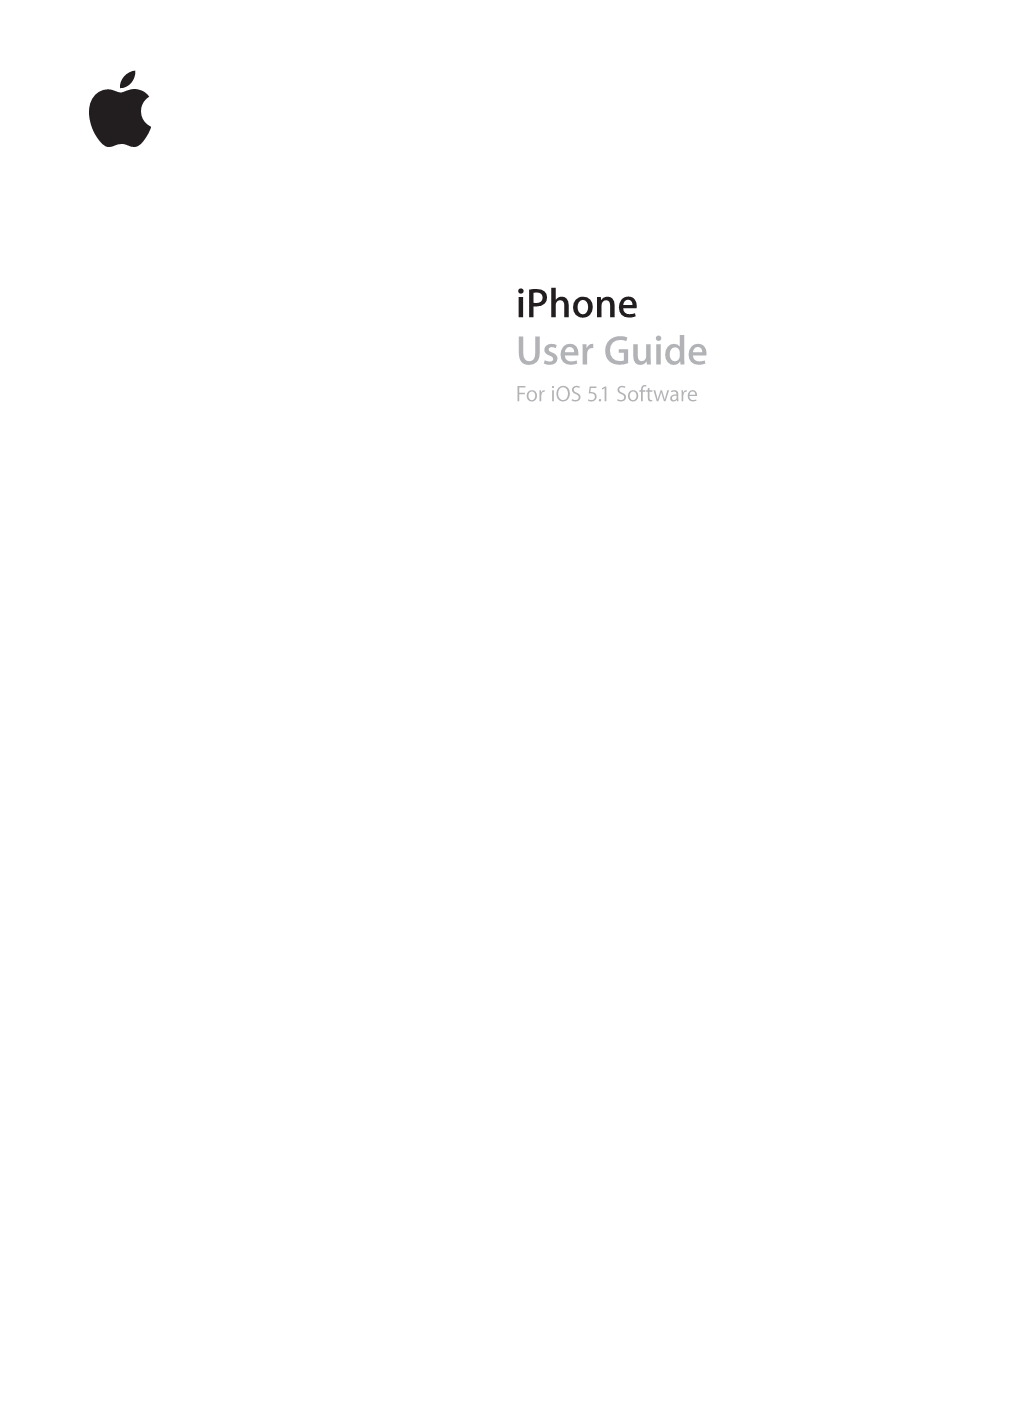 Iphone User Guide for Ios 5.1 Software Contents